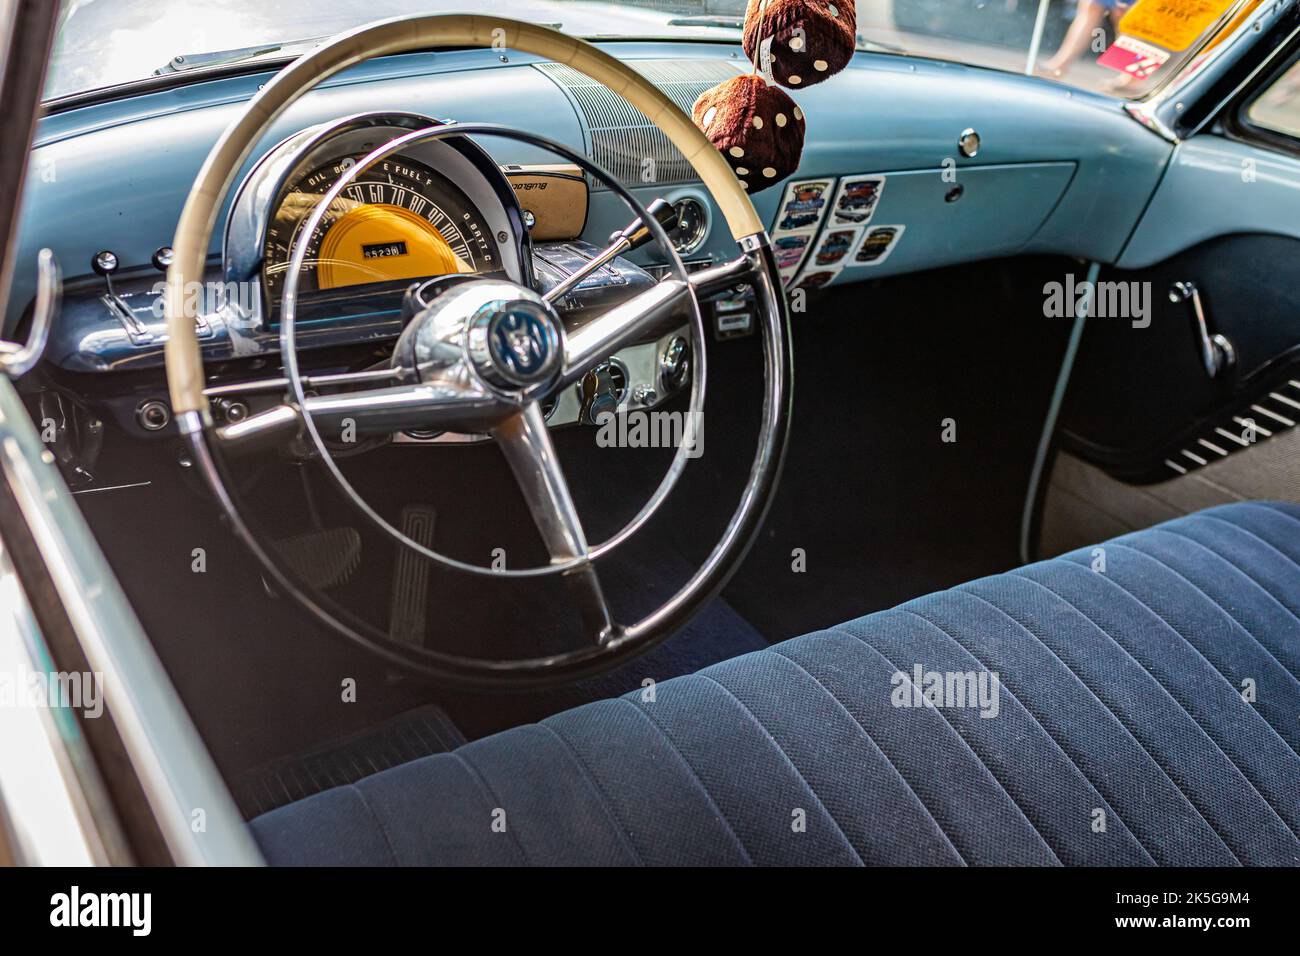 Falcon Heights, MN - June 19, 2022: High perspective detail interior view of a 1953 Mercury Monterey Hardtop Coupe at a local car show. Stock Photo